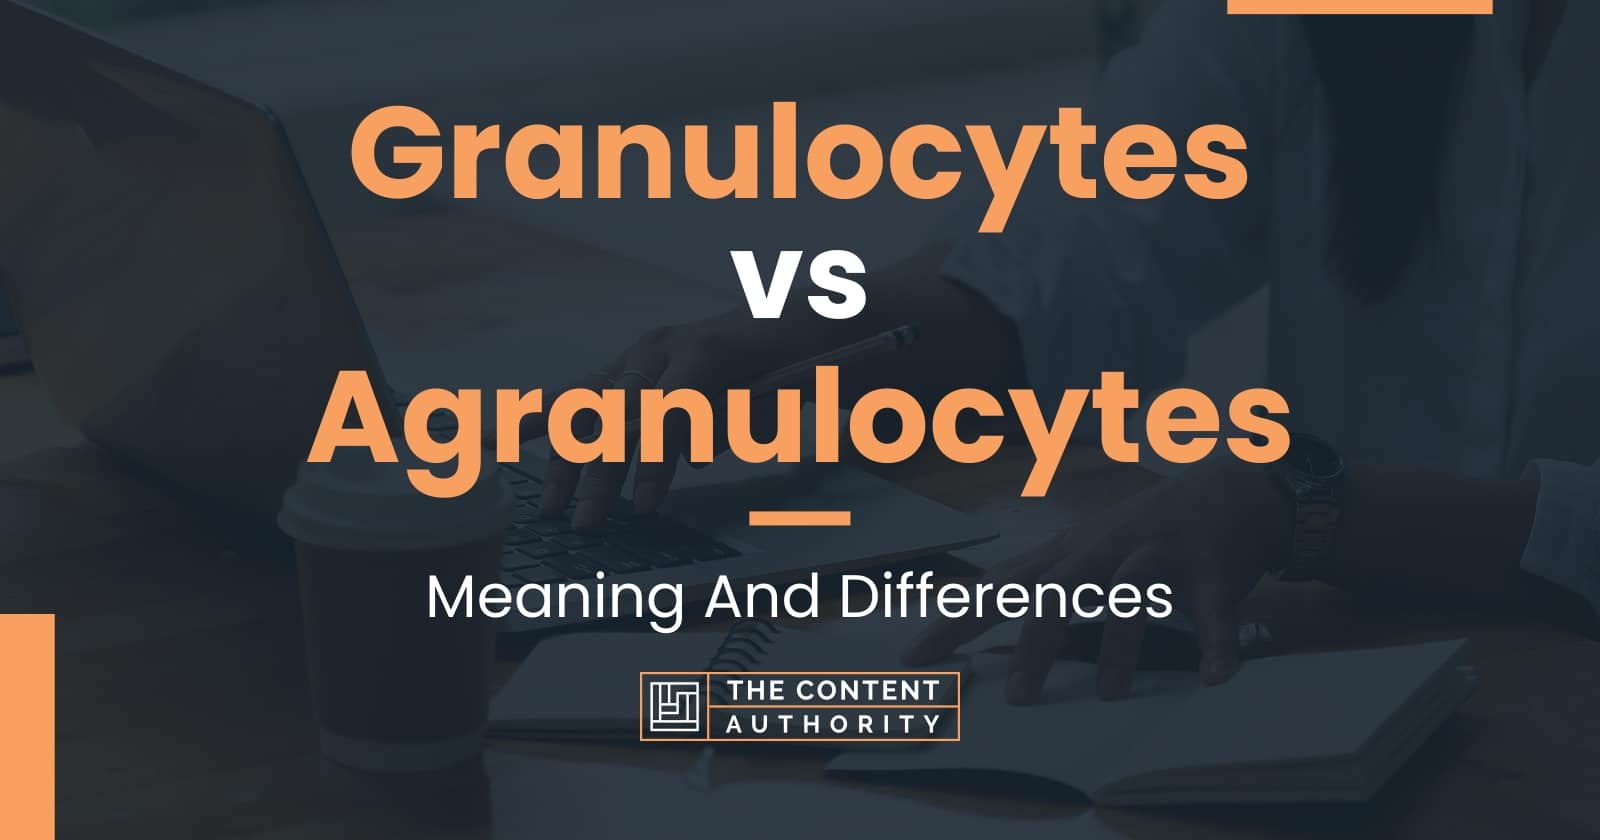 Granulocytes Vs Agranulocytes Meaning And Differences 0175